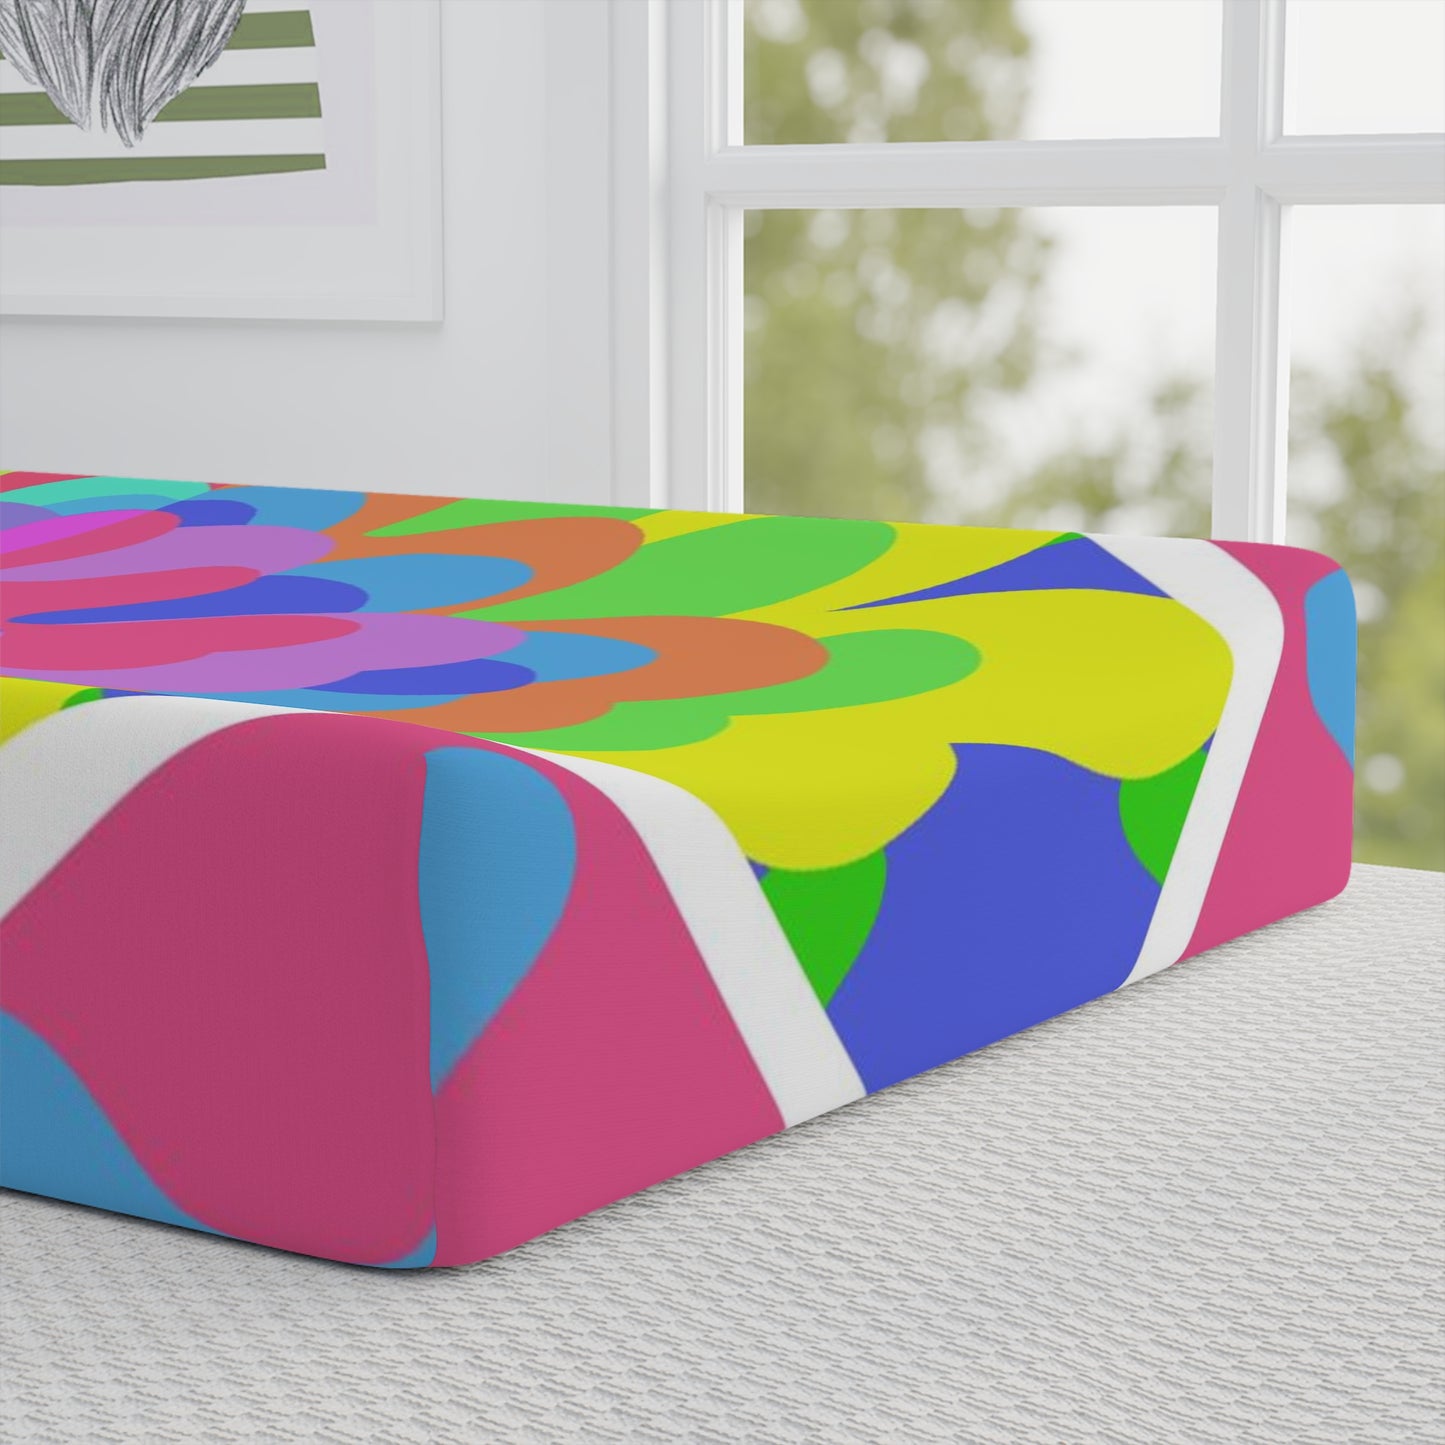 South Miami Design- Baby Changing Pad Cover